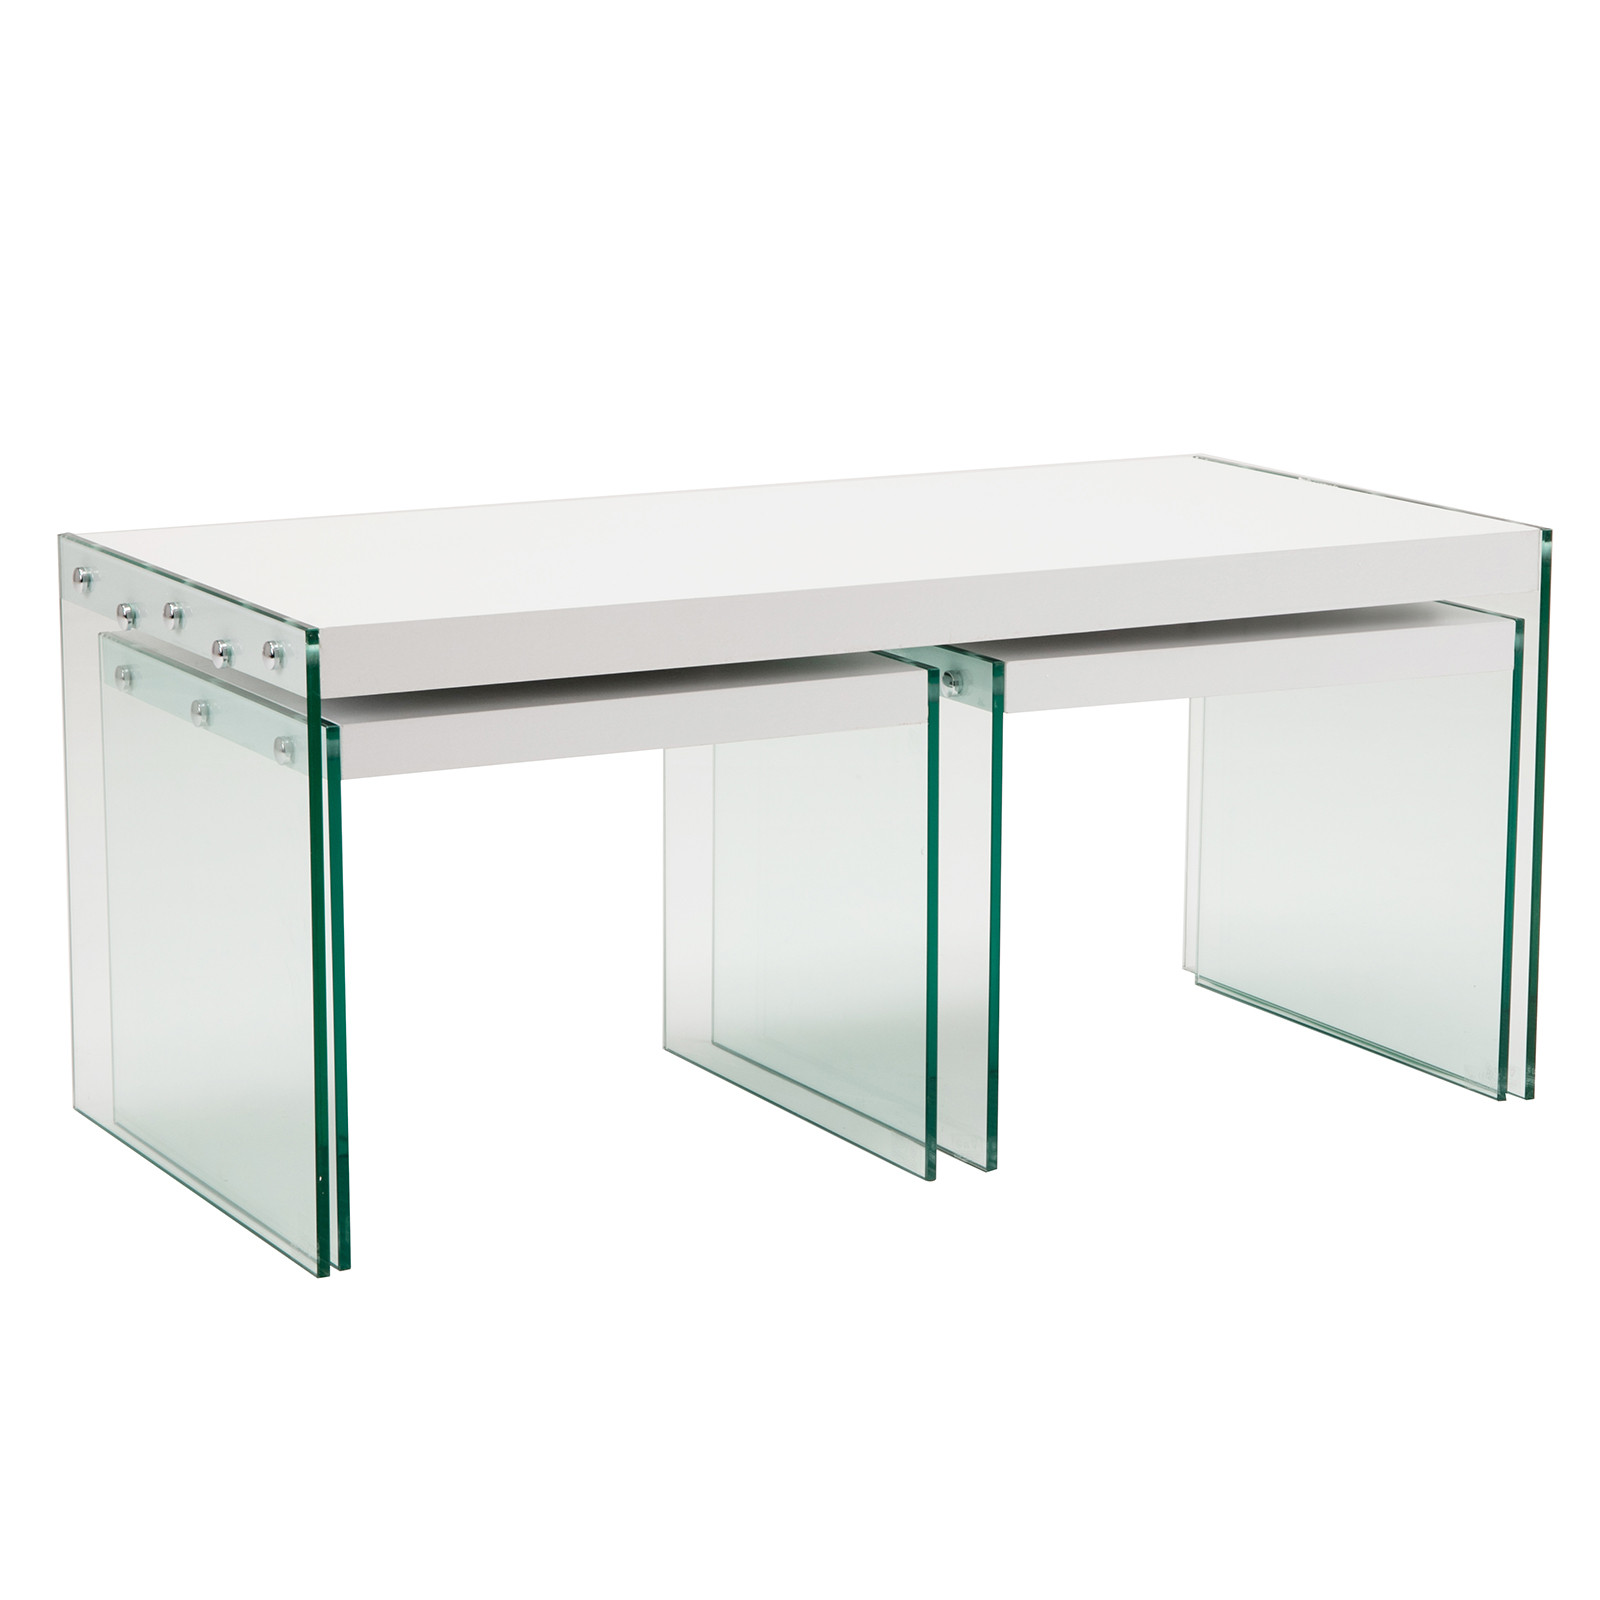 White Living Room Table Sets
 Modern White 3 Piece Glass Side End Table Set Coffee Table